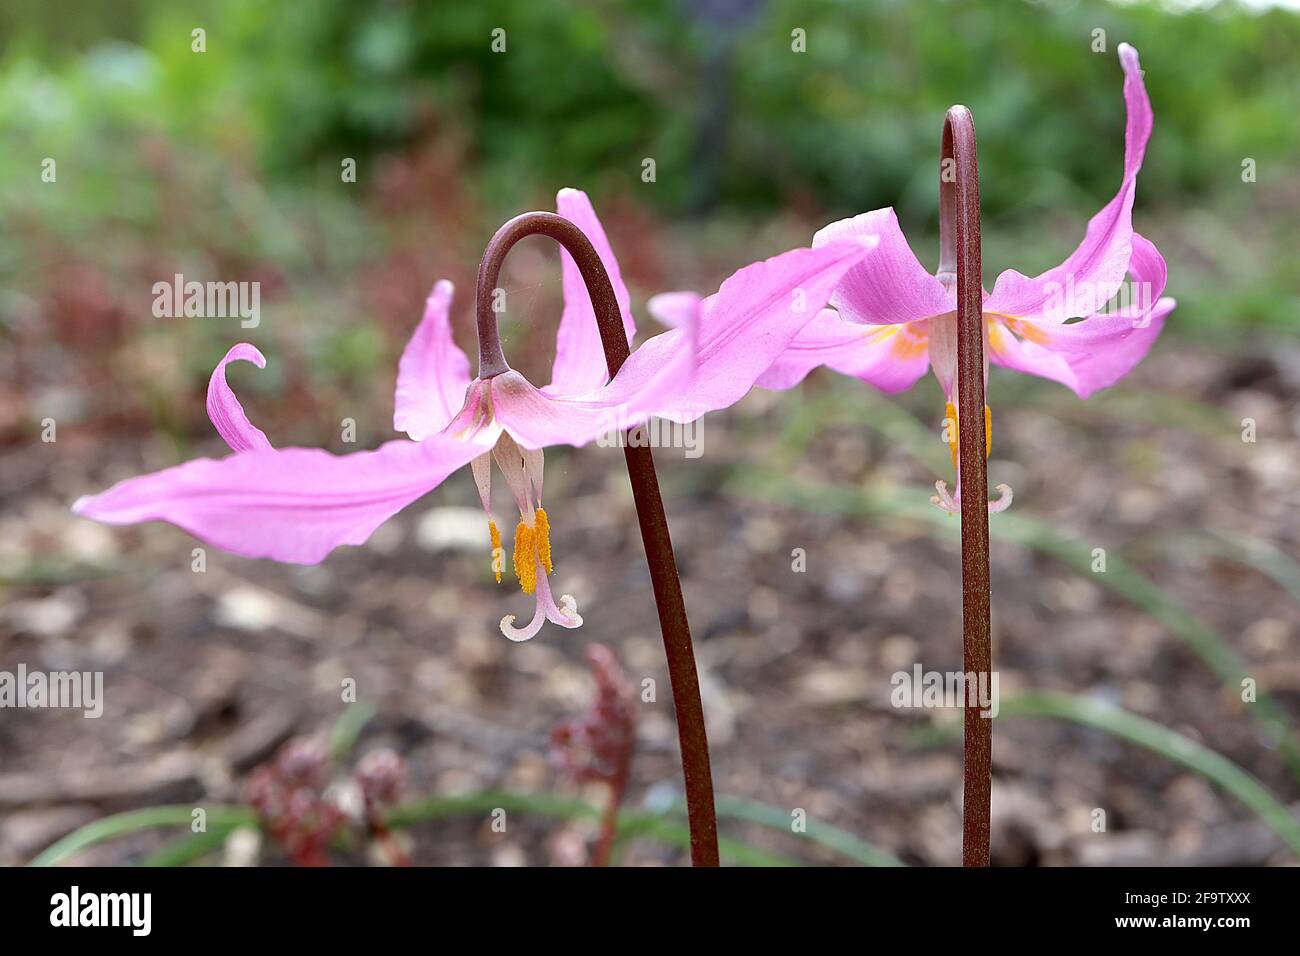 Erythronium revolutum mahogany fawn lily - wide pink bell-shaped flowers with yellow markings and upswept petals, April, England, UK Stock Photo